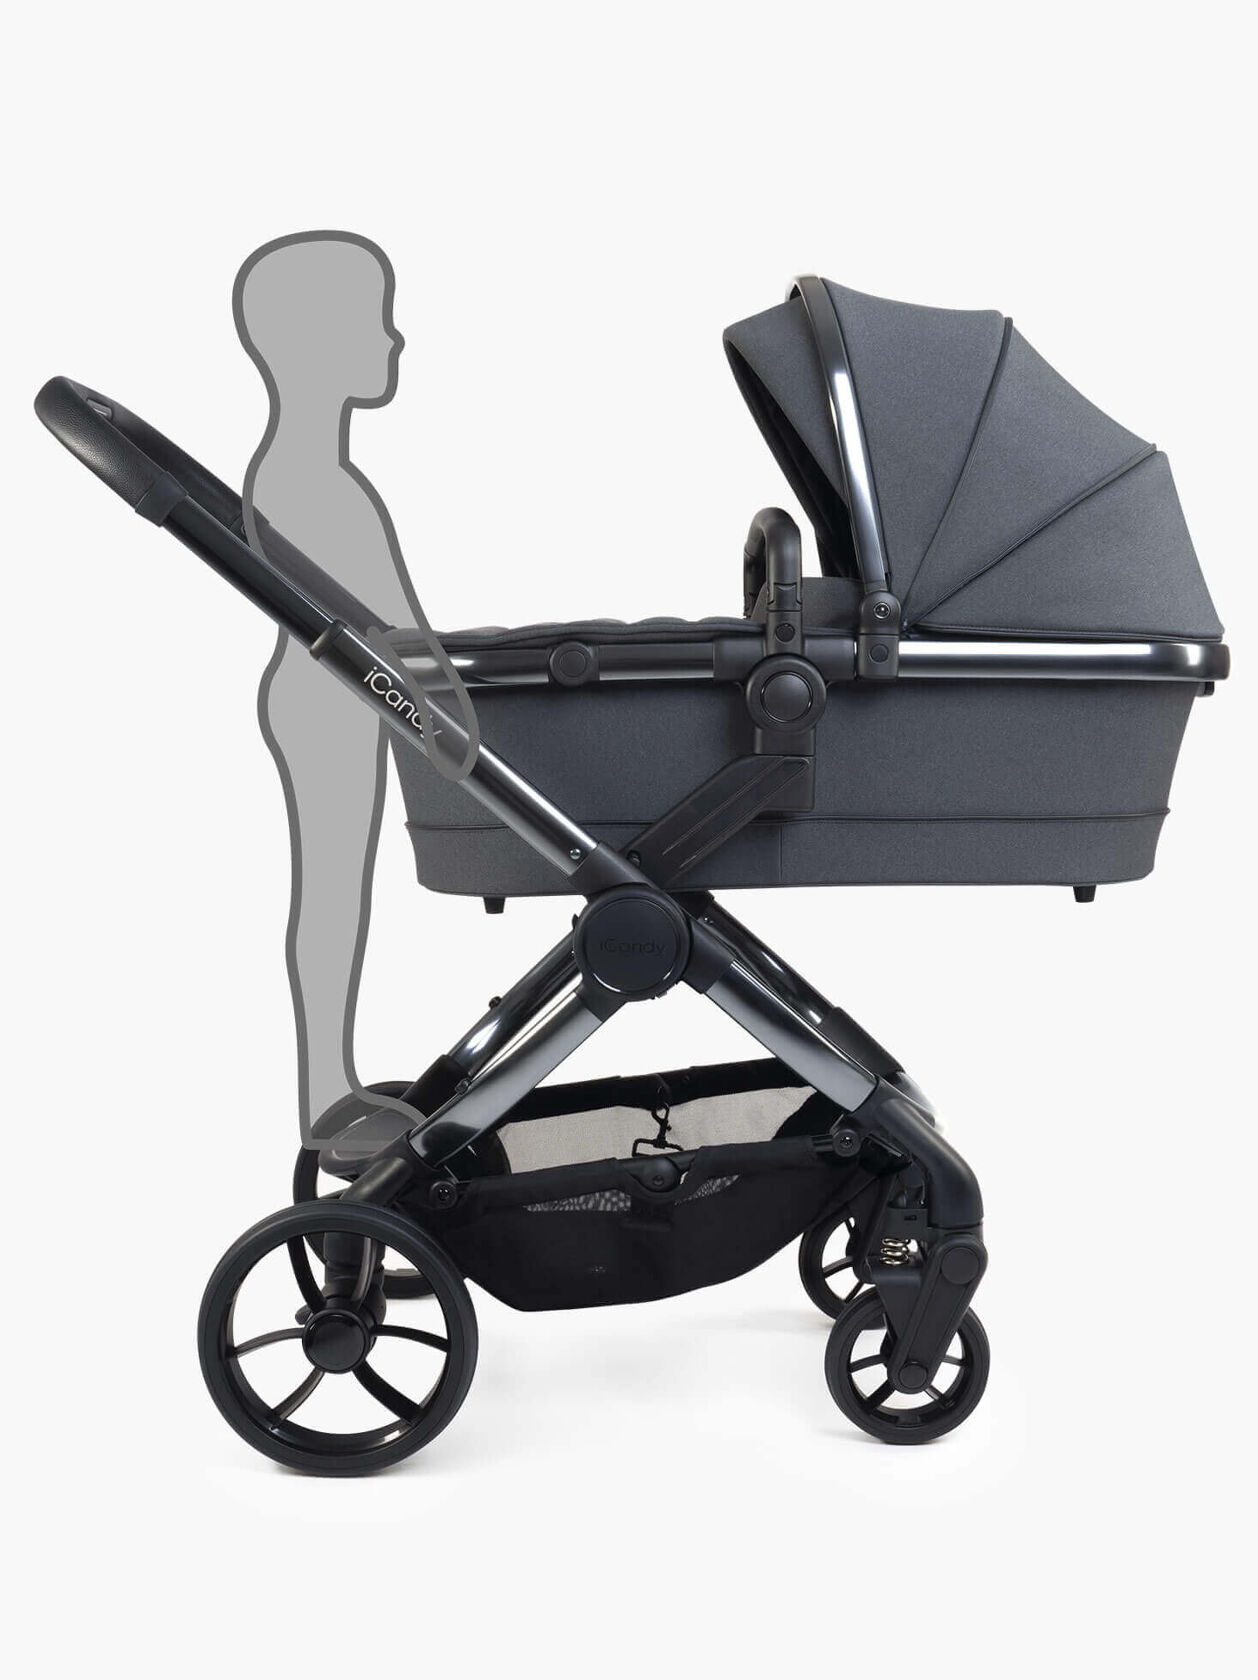 Peach 7 Pushchair and Carrycot